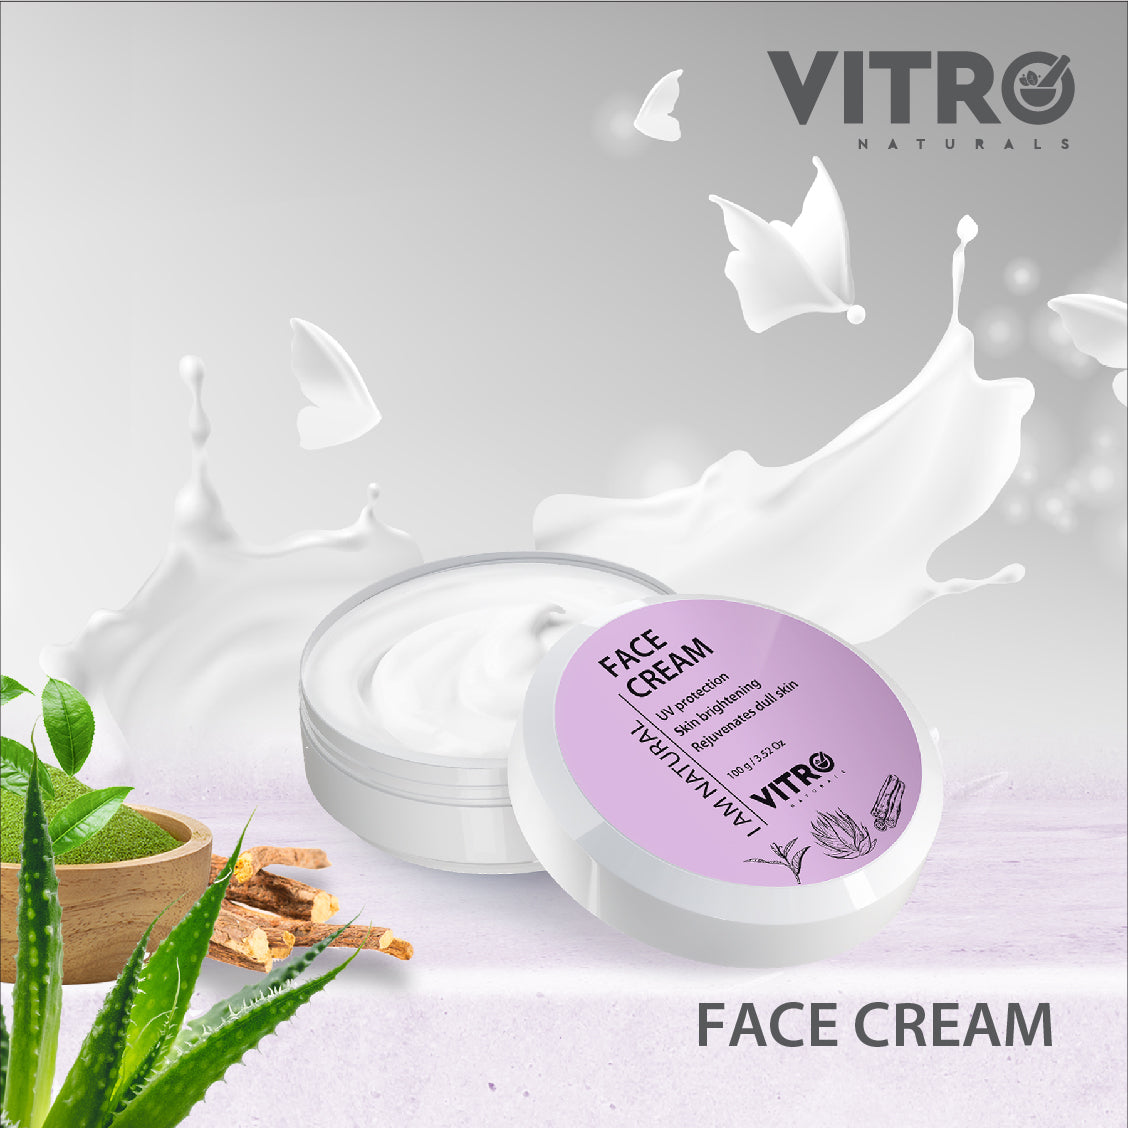 Only at ₹ 1 -  Face Cream For Dark Spot Reduction | Non Greasy Moisturizer Cream With UV Protect 100gm